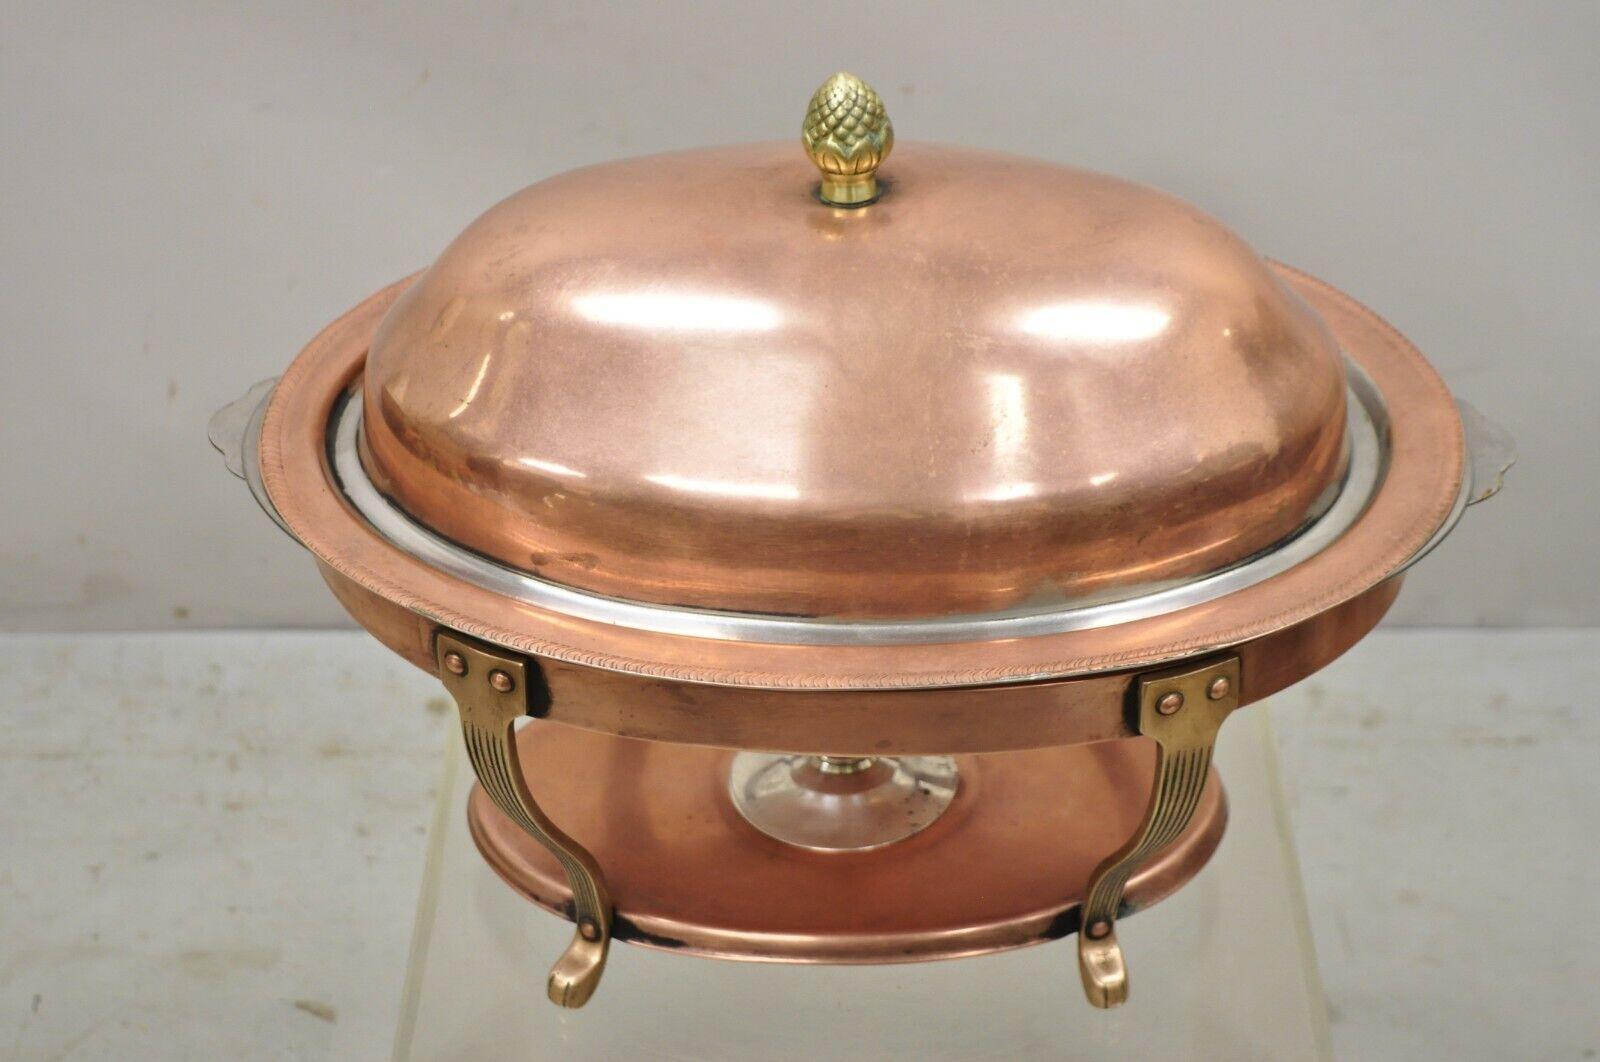 Vintage Legion Utensils Copper & Brass Oval Chafing Dish Warming Tray Serving Pan. Circa Mid 20th Century. Measurements: 16